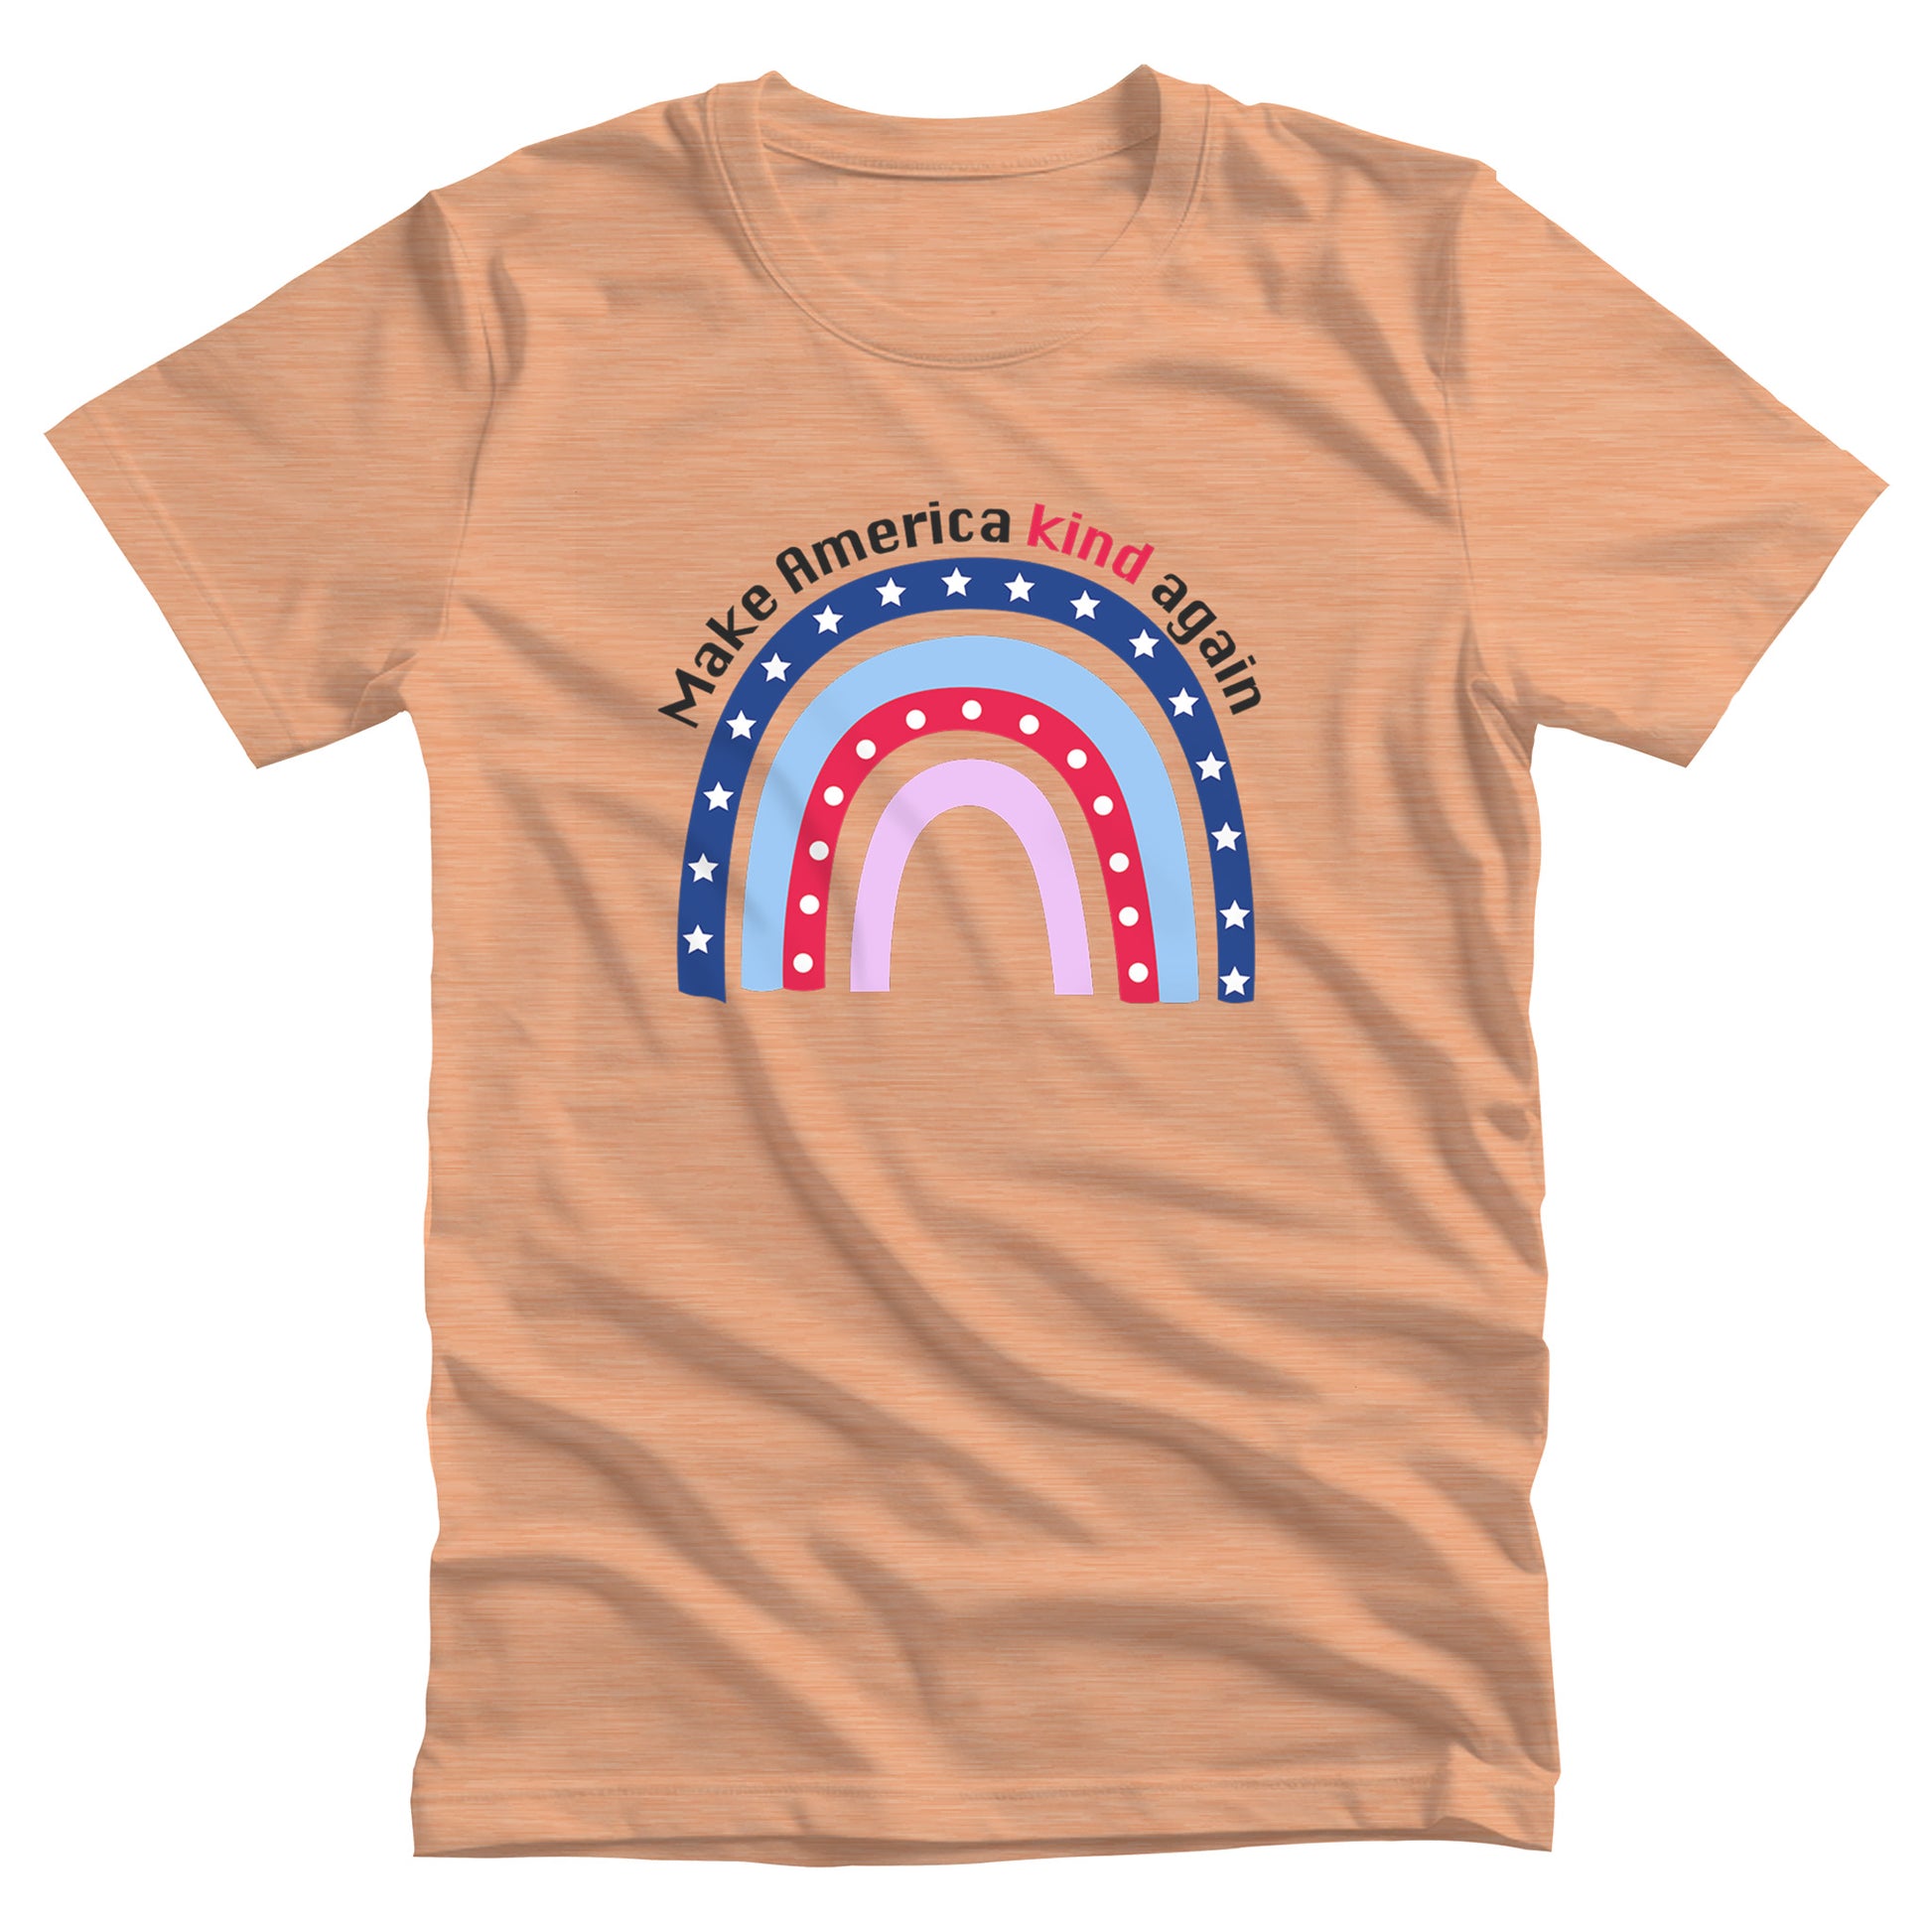 Heather Peach color unisex t-shirt with a graphic of a red and blue rainbow with text arched over the top that says, “Make America Kind Again”.